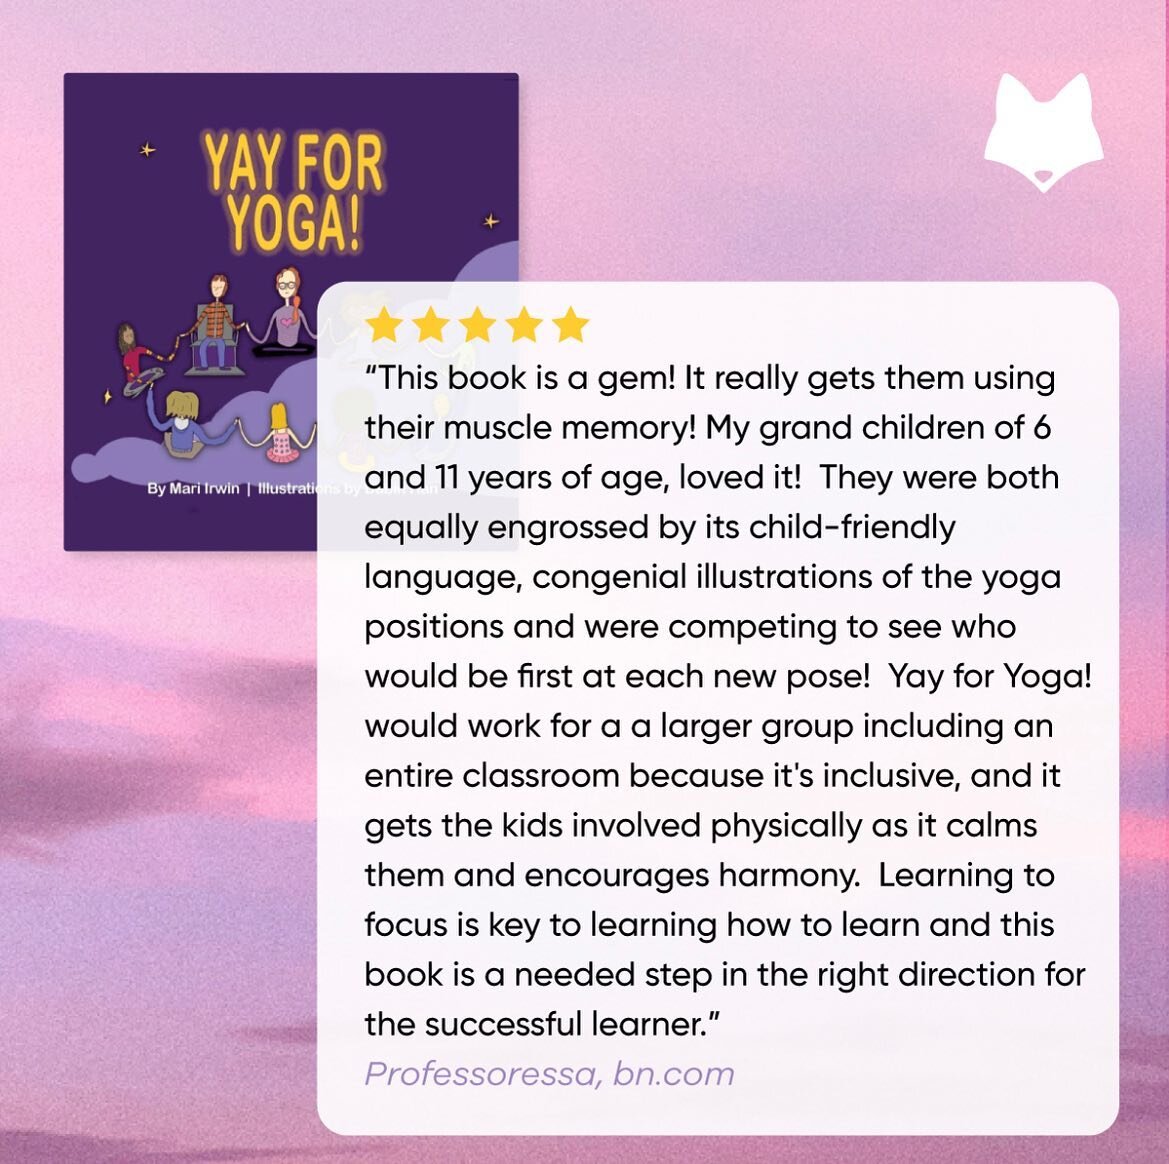 Yay for Yoga! is the perfect, fun holiday gift! Kids, teachers, parents &amp; families love it✨ No screens &amp; super engaging! 

Yay for Yoga! is a wonderful book &amp; teaching tool with engaging illustrations by Dabin Han designed to teach kids a